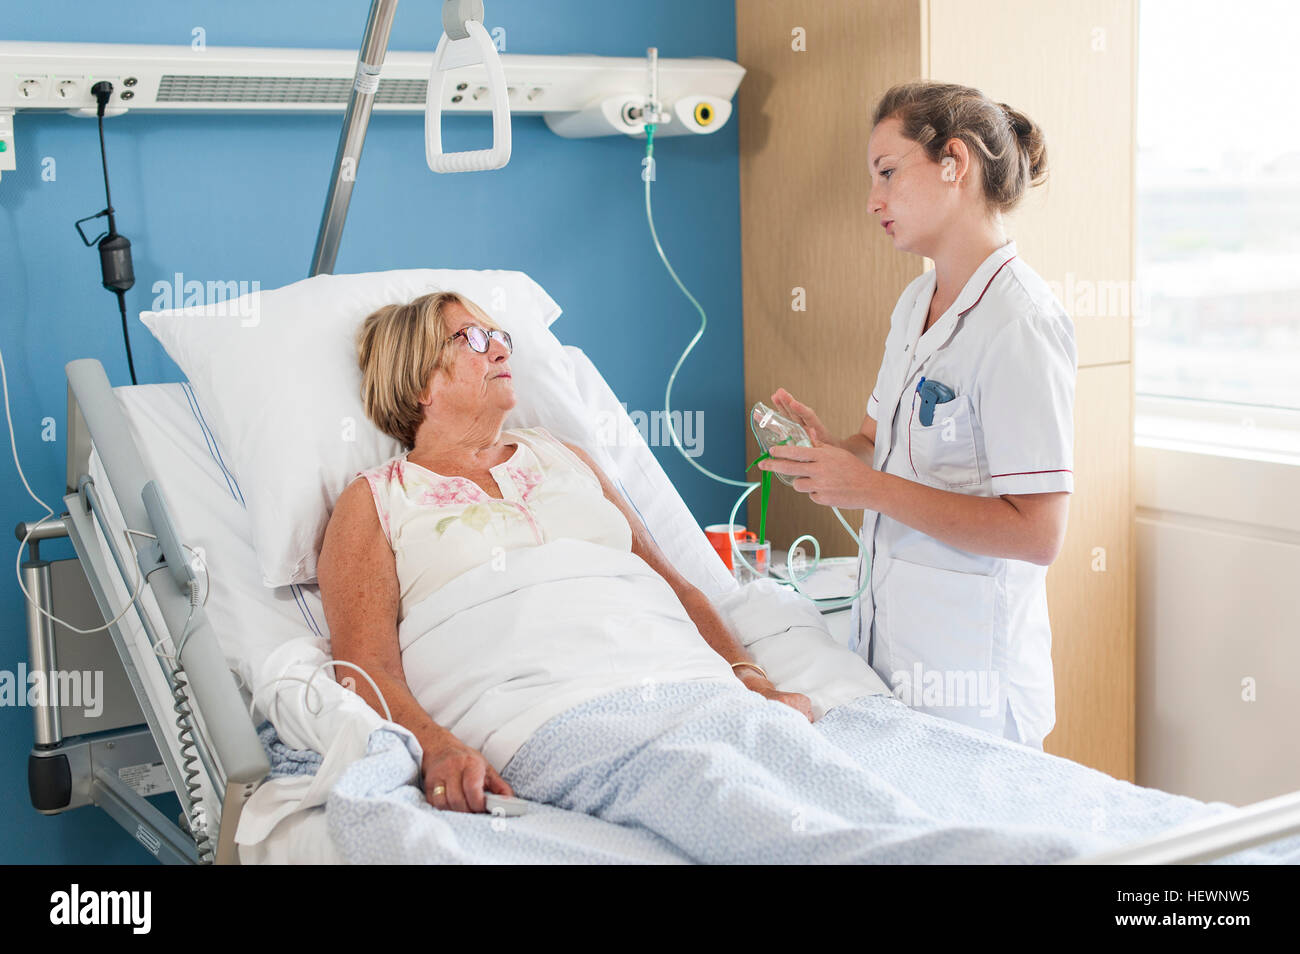 Nurse tending to patient in hospital bed Stock Photo